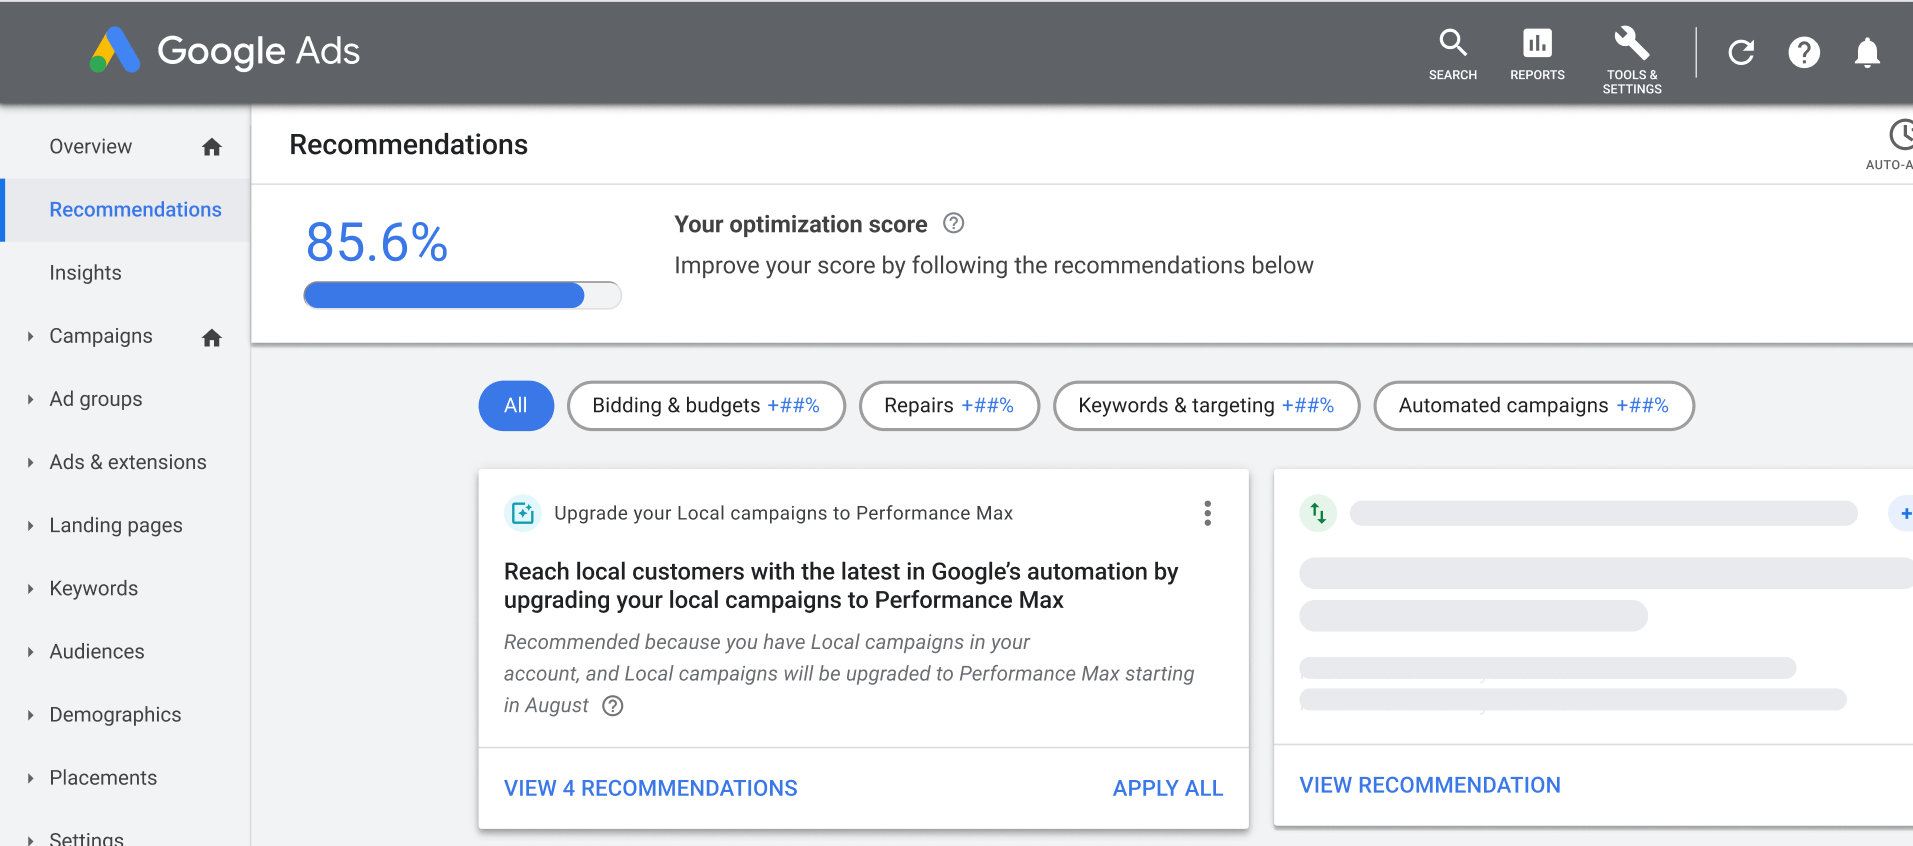 Google Ads launches tool to upgrade to maximum performance